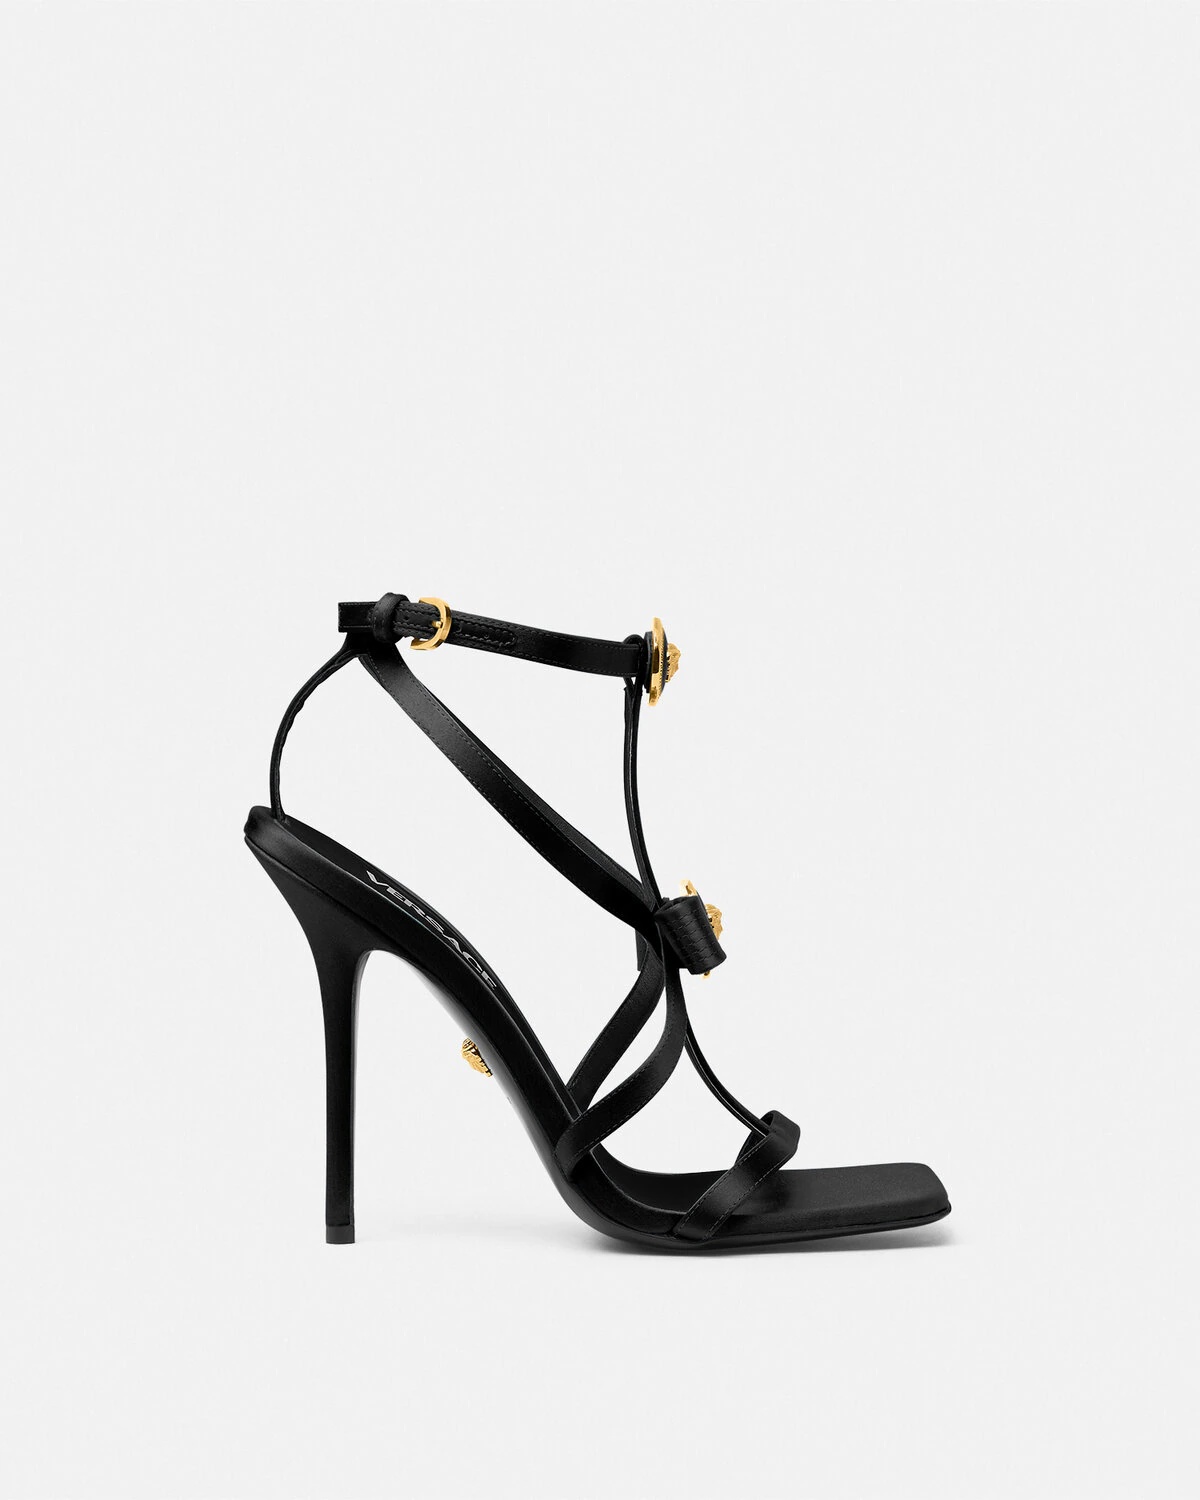 Gianni Ribbon Satin Cage Sandals 110 mm - 1